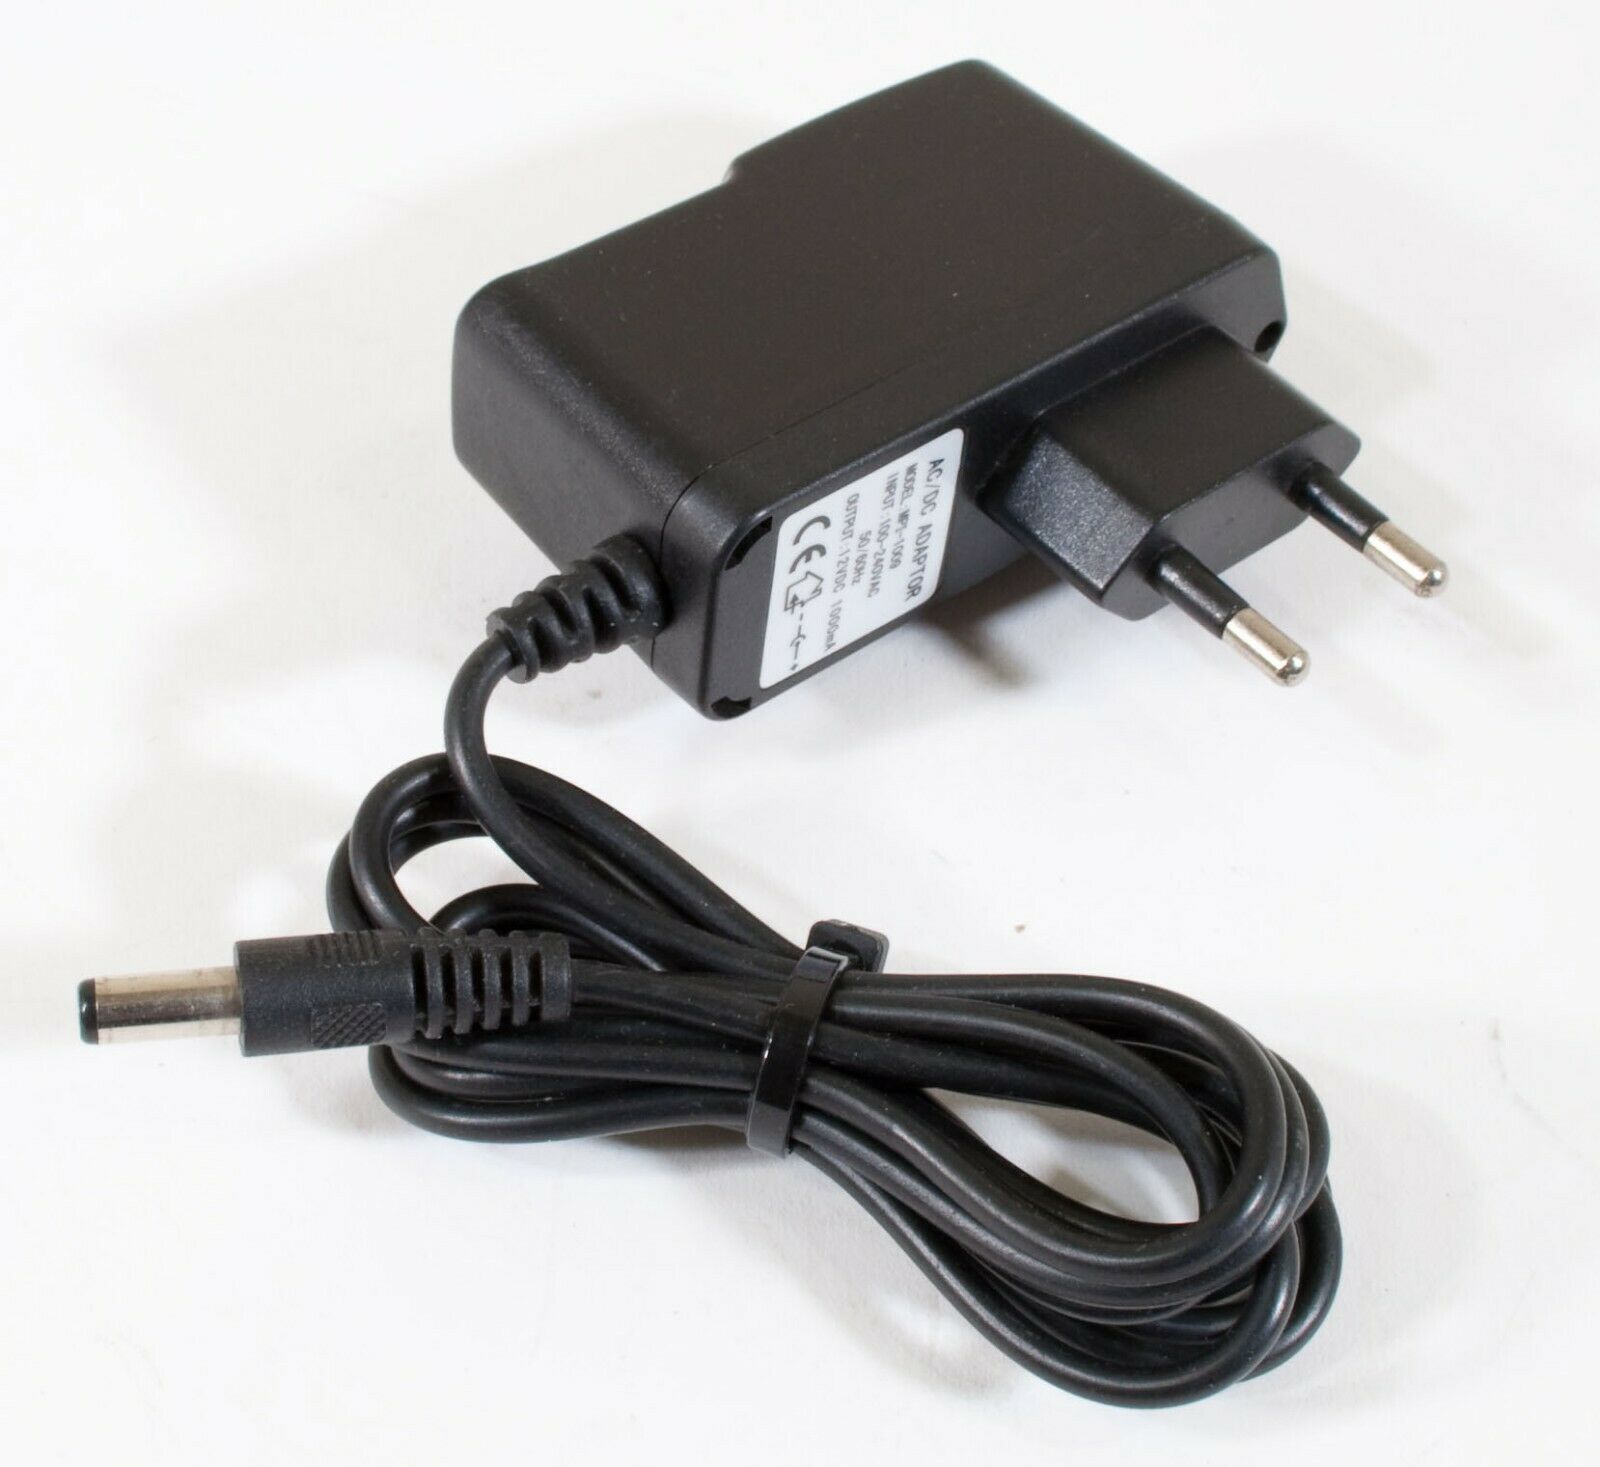 MPI-1009 AC Adapter 12V 1000mA Original Charger Power Supply Output Current: 1000 mA Type: Power Adapter MPN: MPI-100